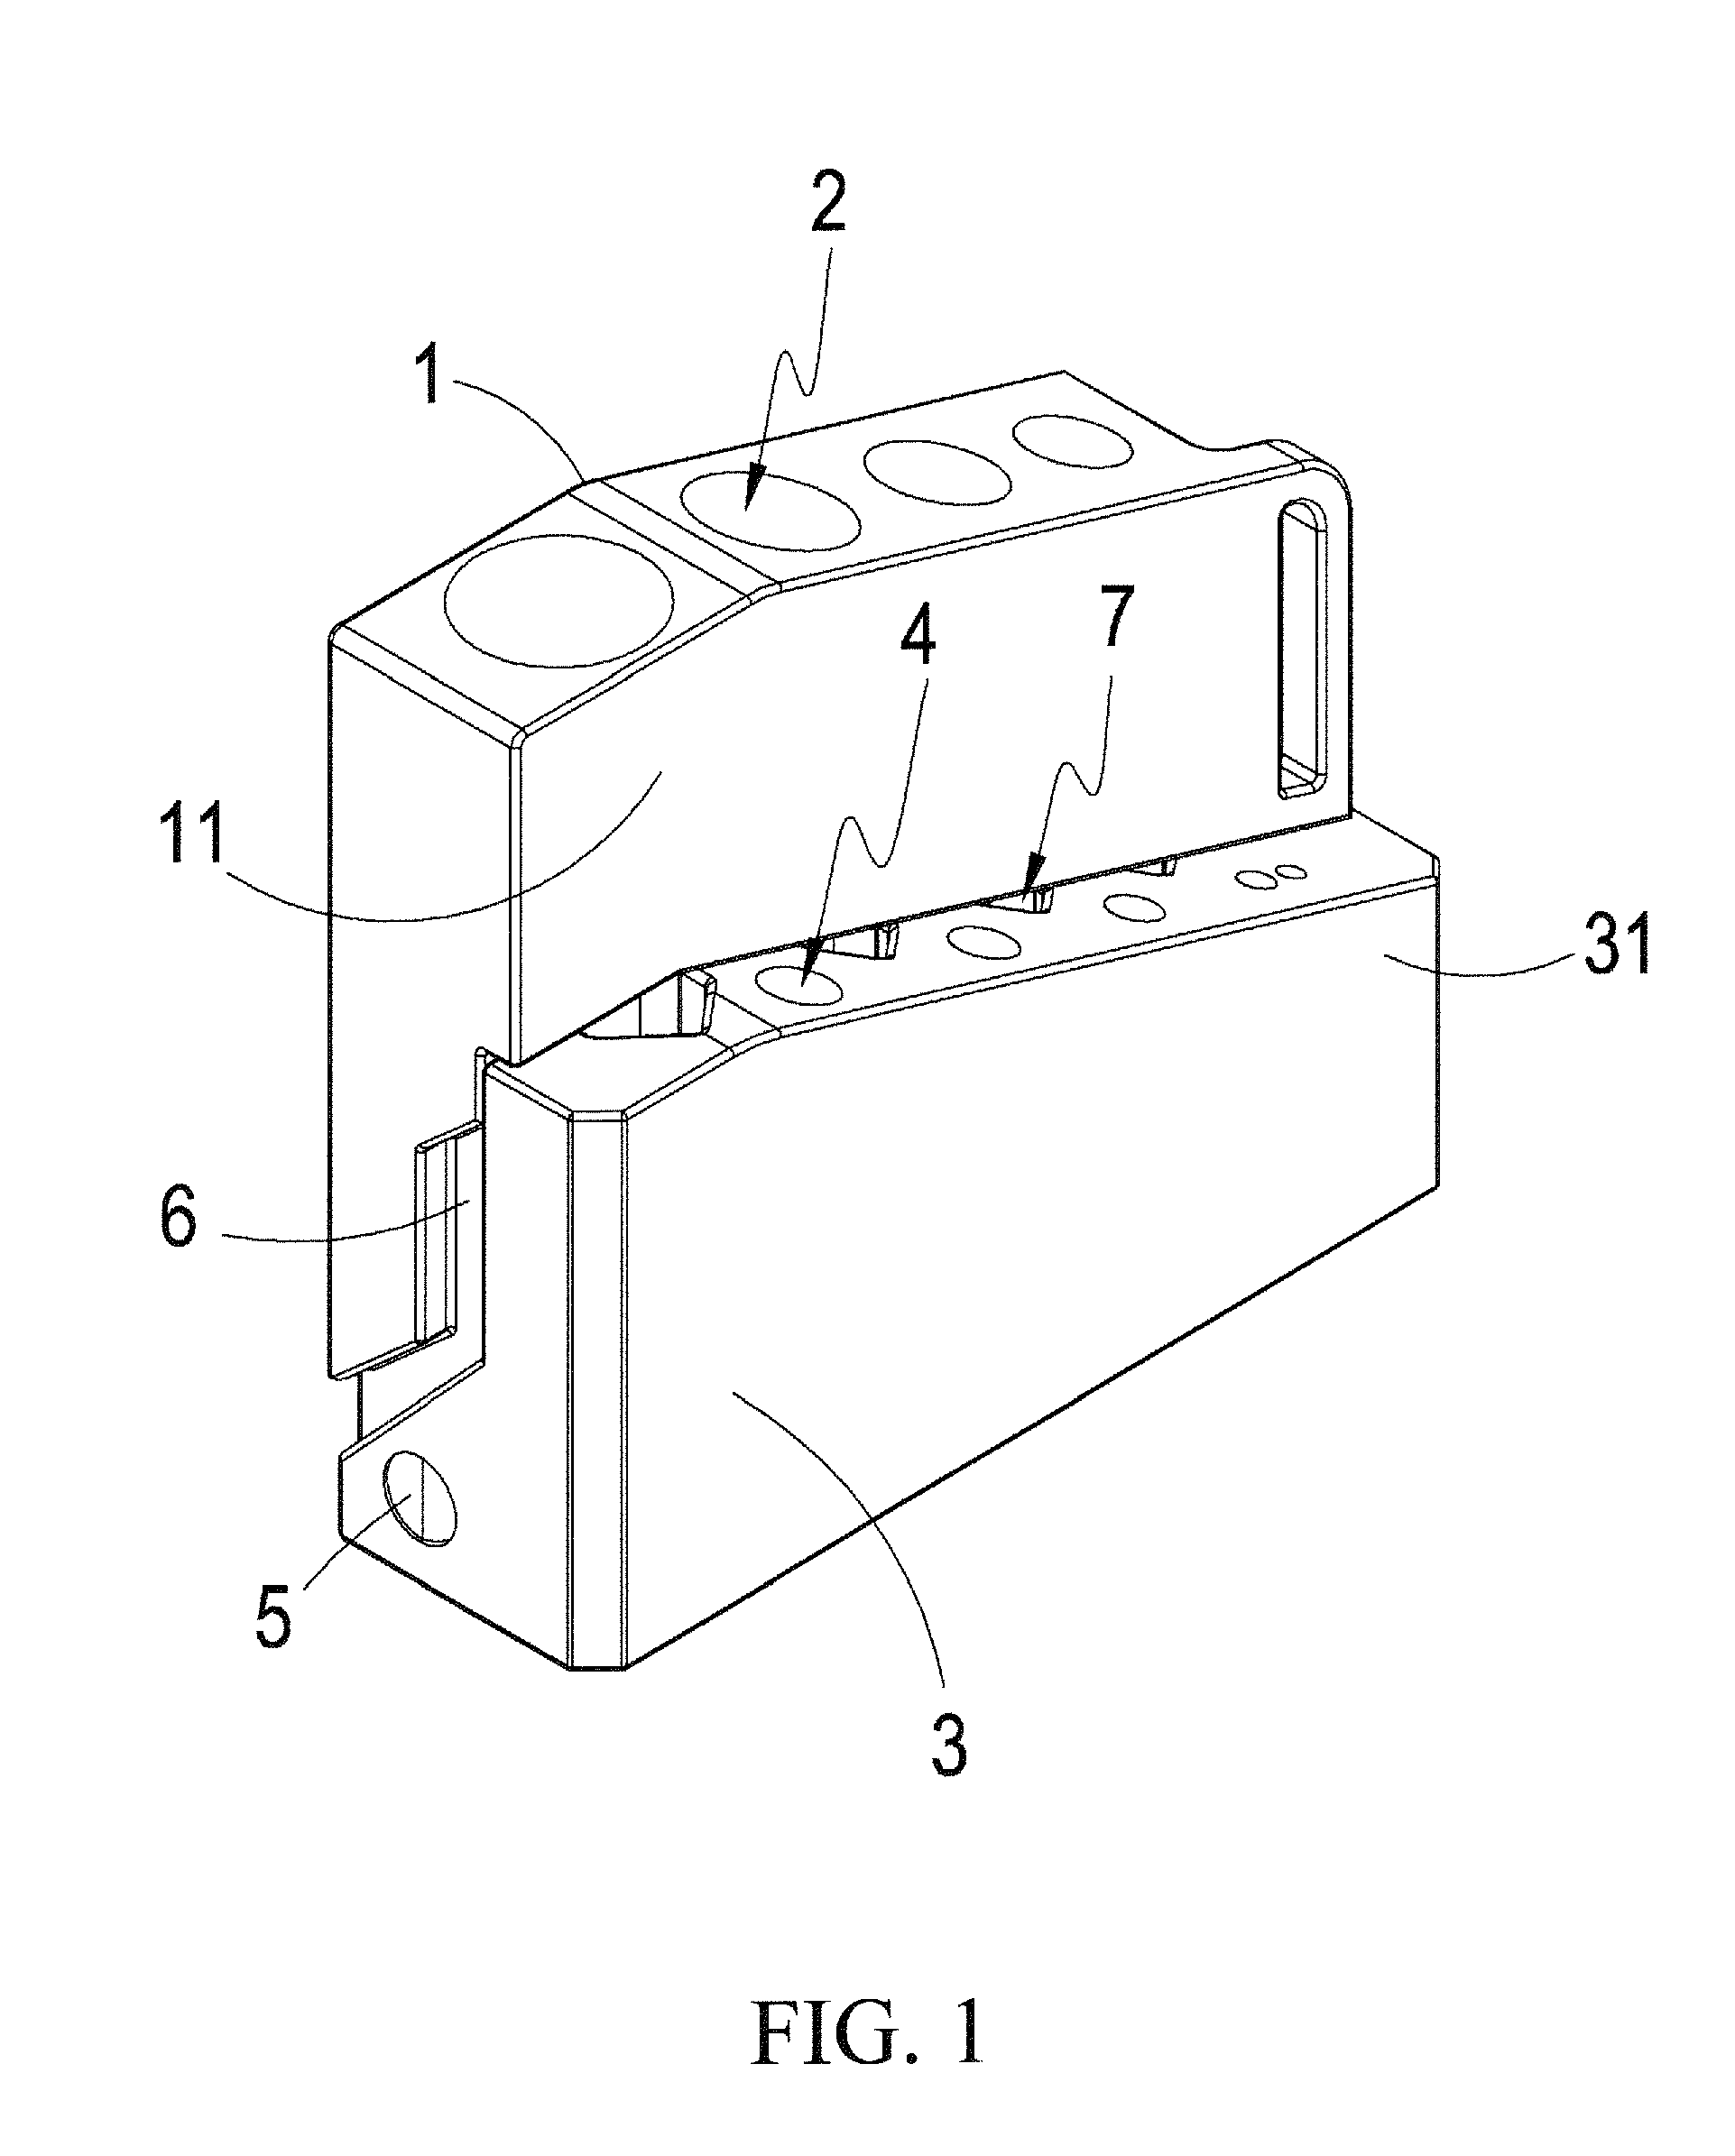 Structure of Tool Holding Sheath Cross Reference To Related Application